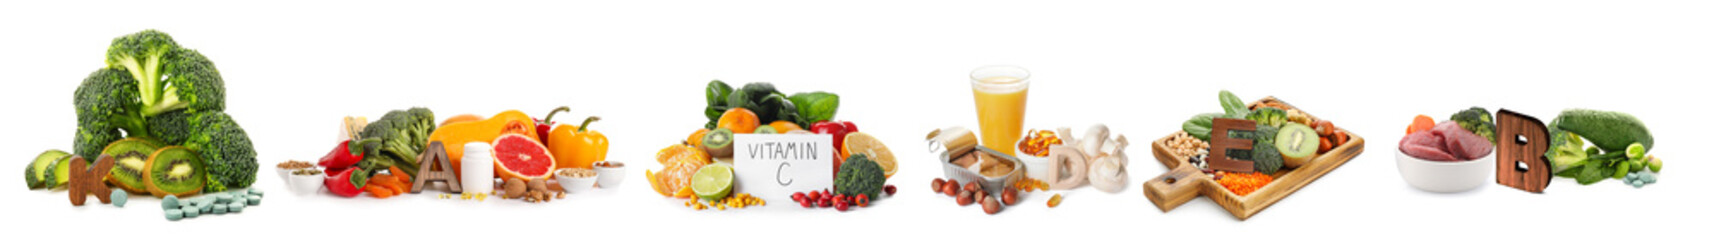 Different healthy products and vitamin pills on white background